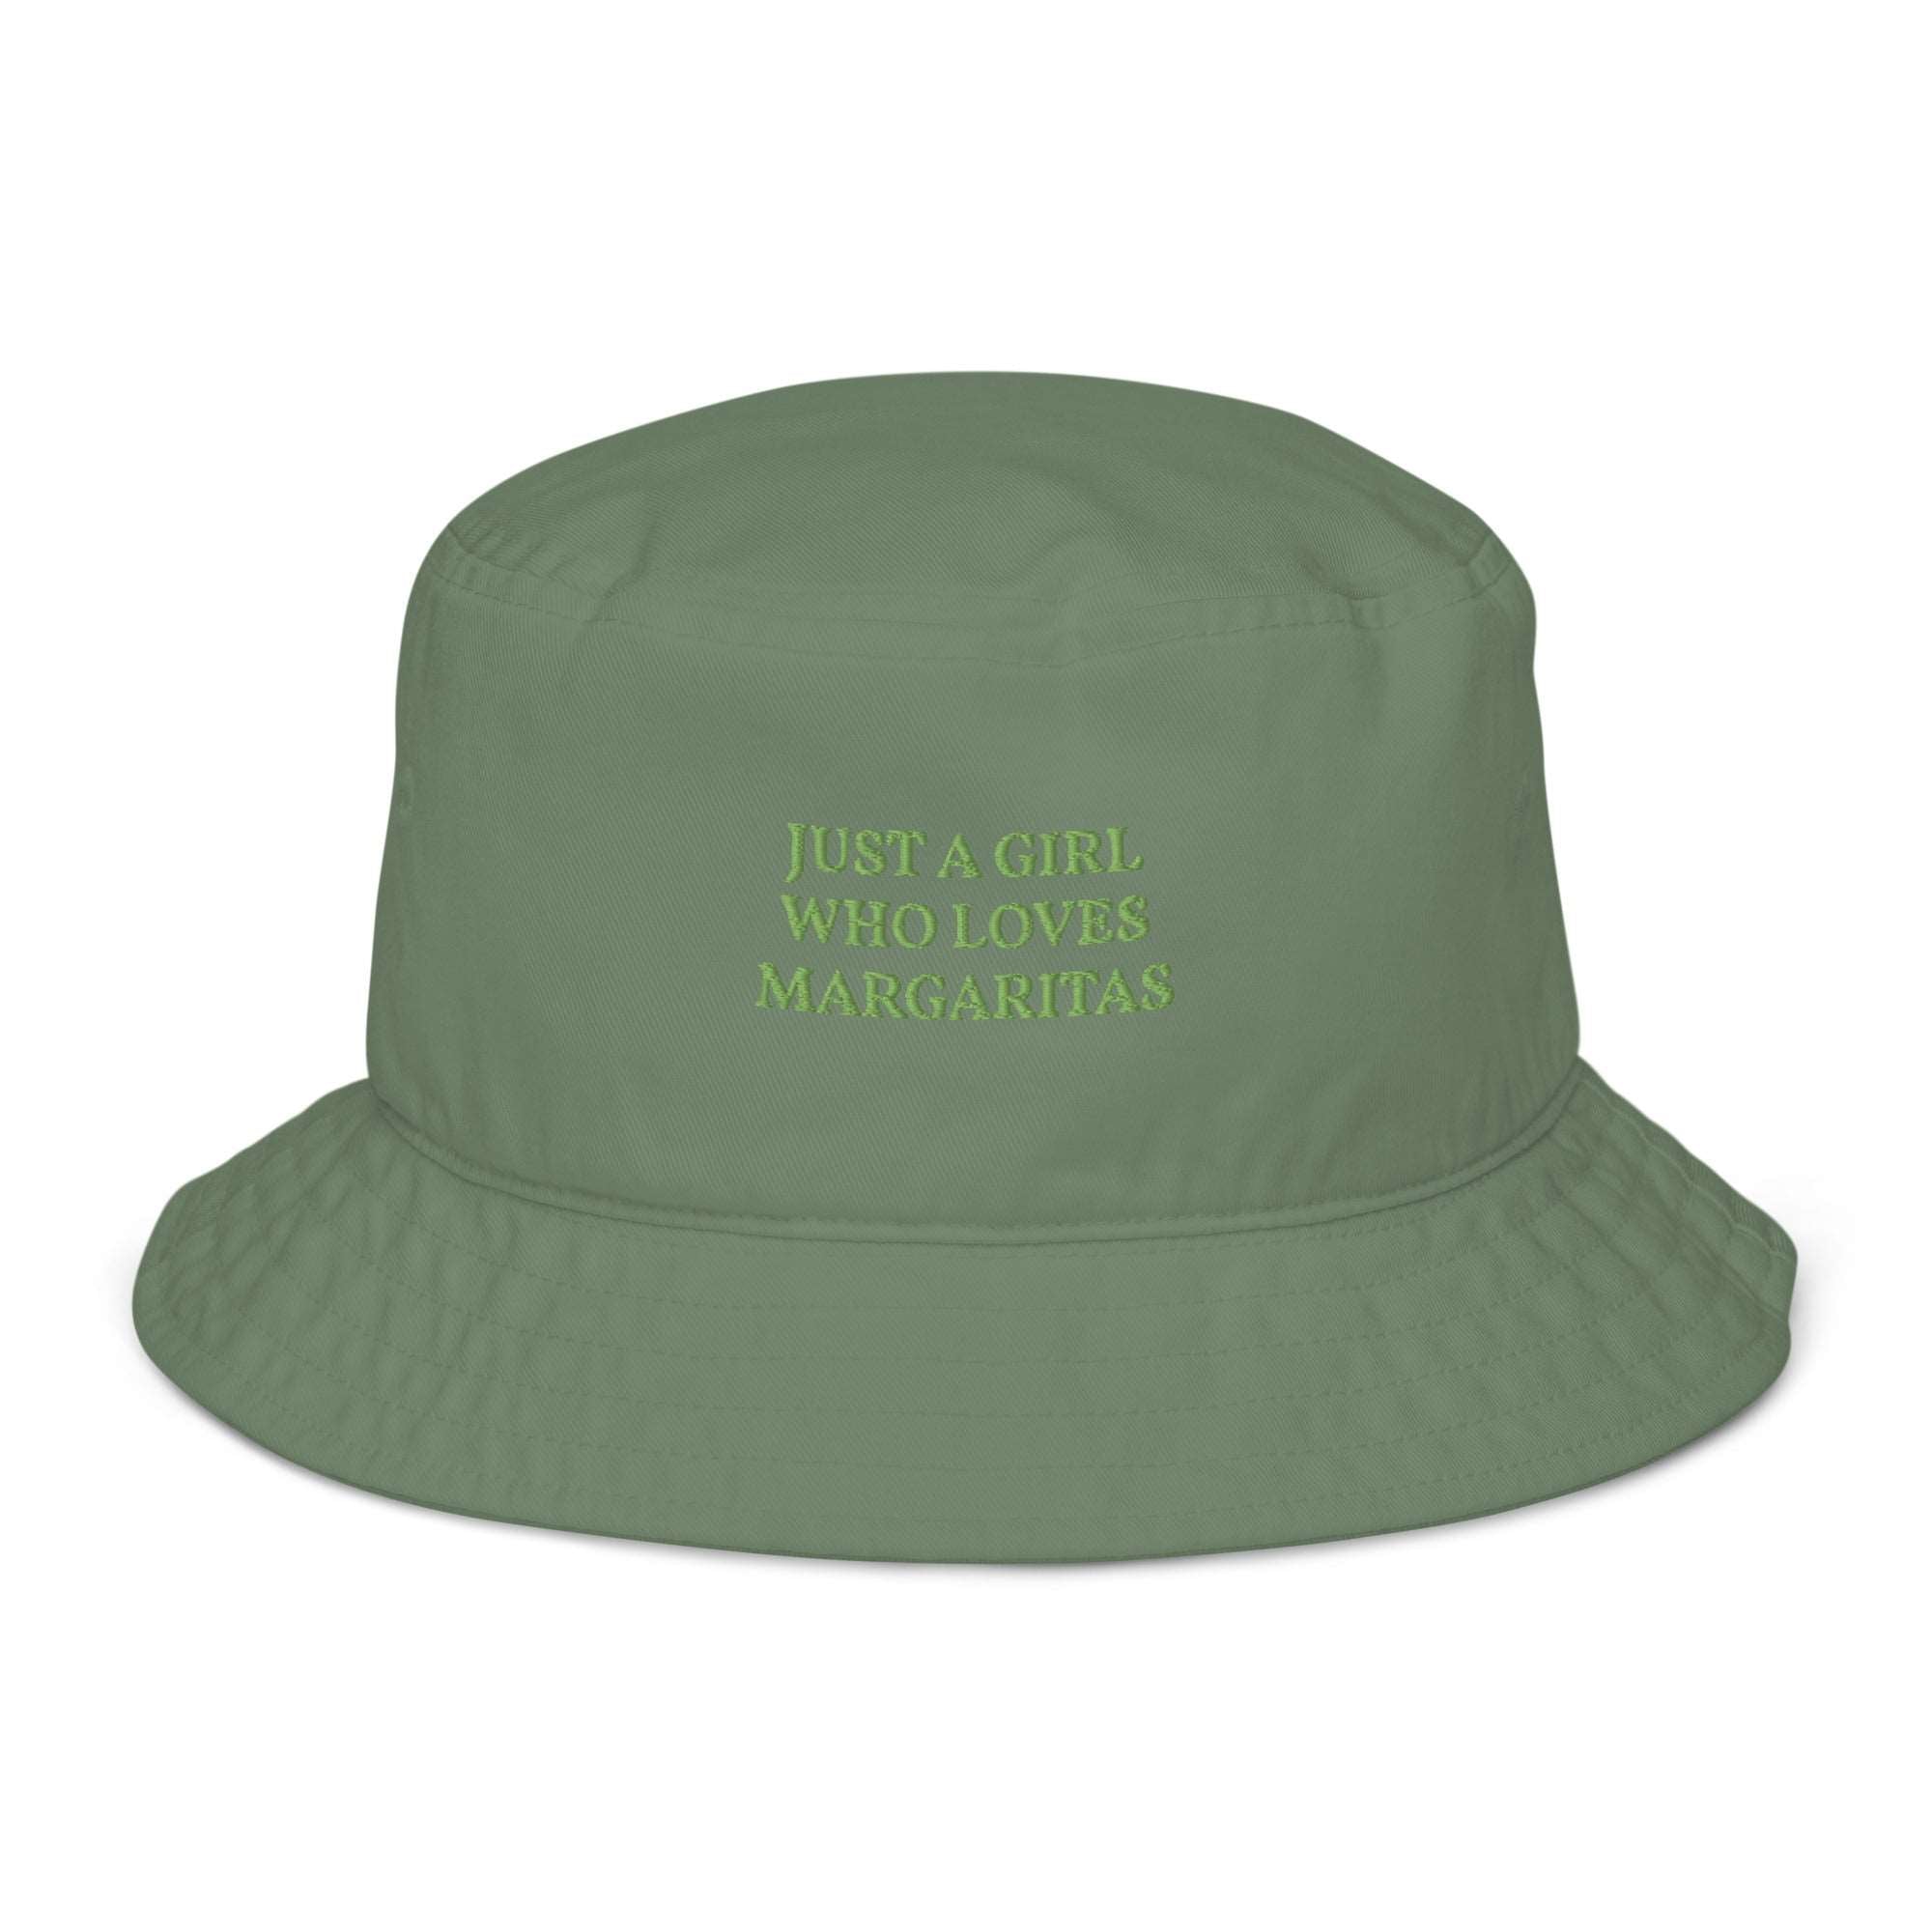 Just a Girl who loves Margaritas - Organic Embroidered Bucket Hat - The Refined Spirit